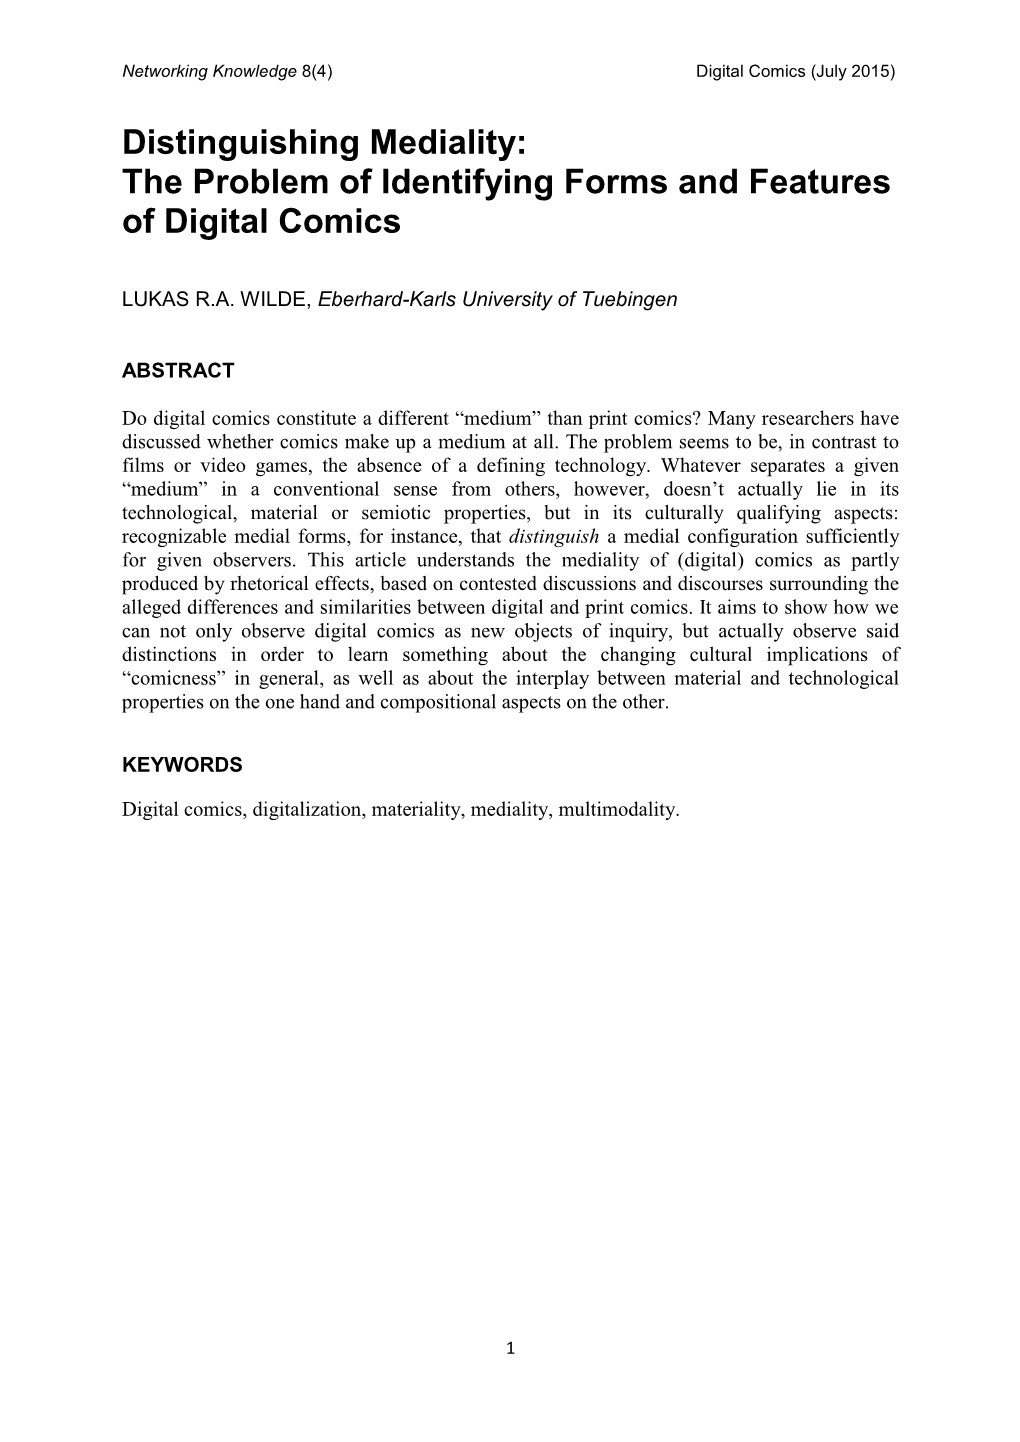 The Problem of Identifying Forms and Features of Digital Comics